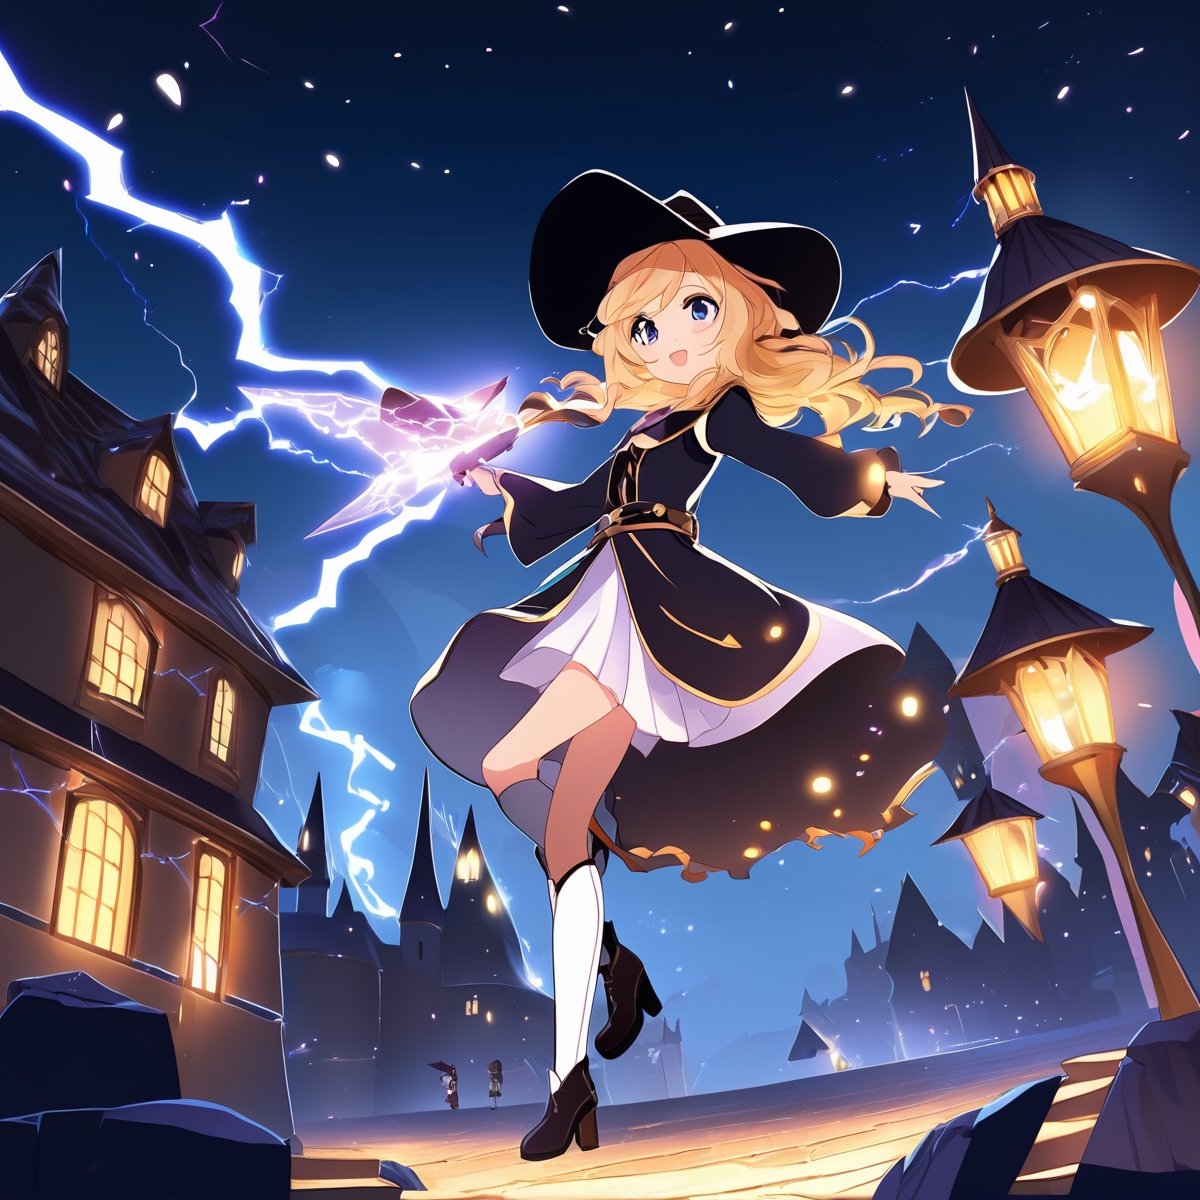 (dark background:1.33), start lights, ruins, full body, chibi, (18year old girl:1.5)), Anime SFW image, beautiful girl, slender figure, young adult, random poses, random angles, A composition that captures the whole body, detailed fan art, witch girl, splash art anime kawaii, bright witch, official artwork, witch hat commission, Cheerful, official fan art, cute art style, best quality, extreme light and shadow, magical wand, white thigh high boots, brown robe, white skirt, night view, bouncing hair, 1 girl, anime style, small face features, large expressive eyes, small nose, thin lips, small chin, soft hands, (realism: 1.2), petite, bangs, (trace the contour with detailed intricate white thin lined crackling shimmering vibrant lightning:1.3), (glowing:1.1), (shimmer and twinkl:1.2), luminism, breathtaking fusion of light, indelible impression, high quality, masterpiece, swirling luminescent ribbons, (halloween theme:1.15), 